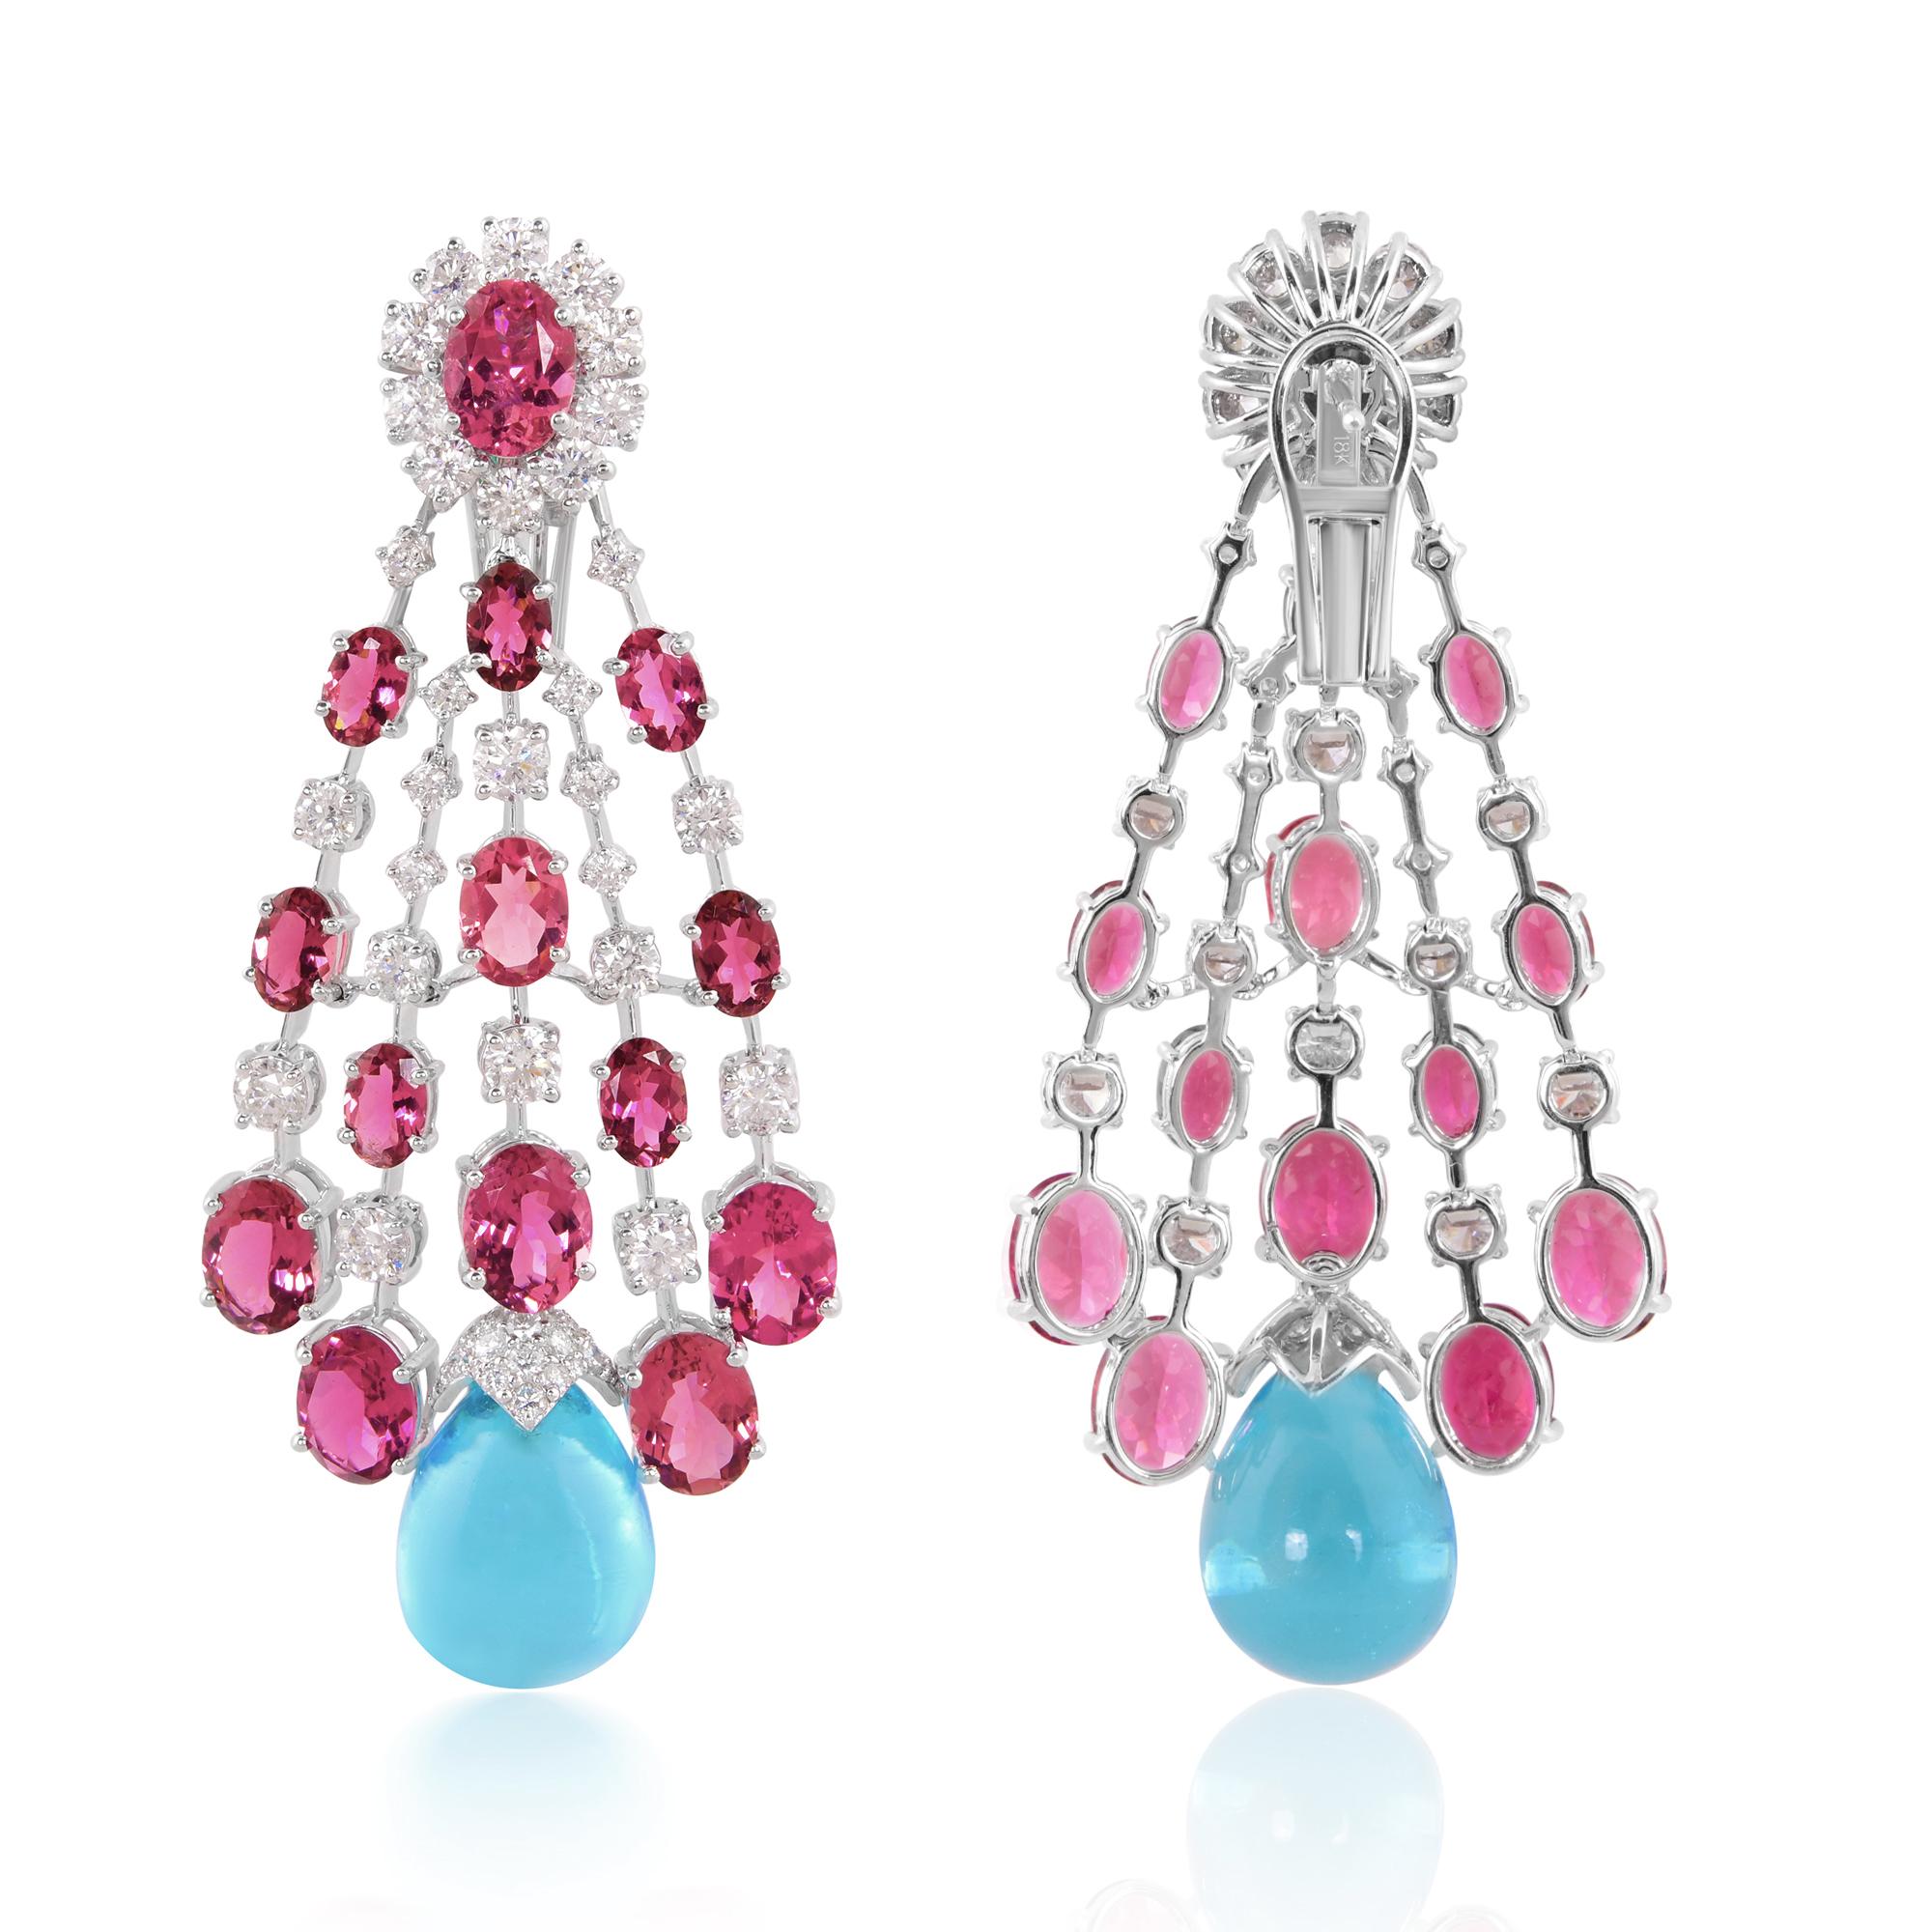 Surrounding the gemstones are dazzling diamonds, meticulously set to enhance their brilliance and radiance. Each diamond sparkles with unmatched clarity and fire, adding a touch of luxury and glamour to these already stunning earrings.

Item Code :-